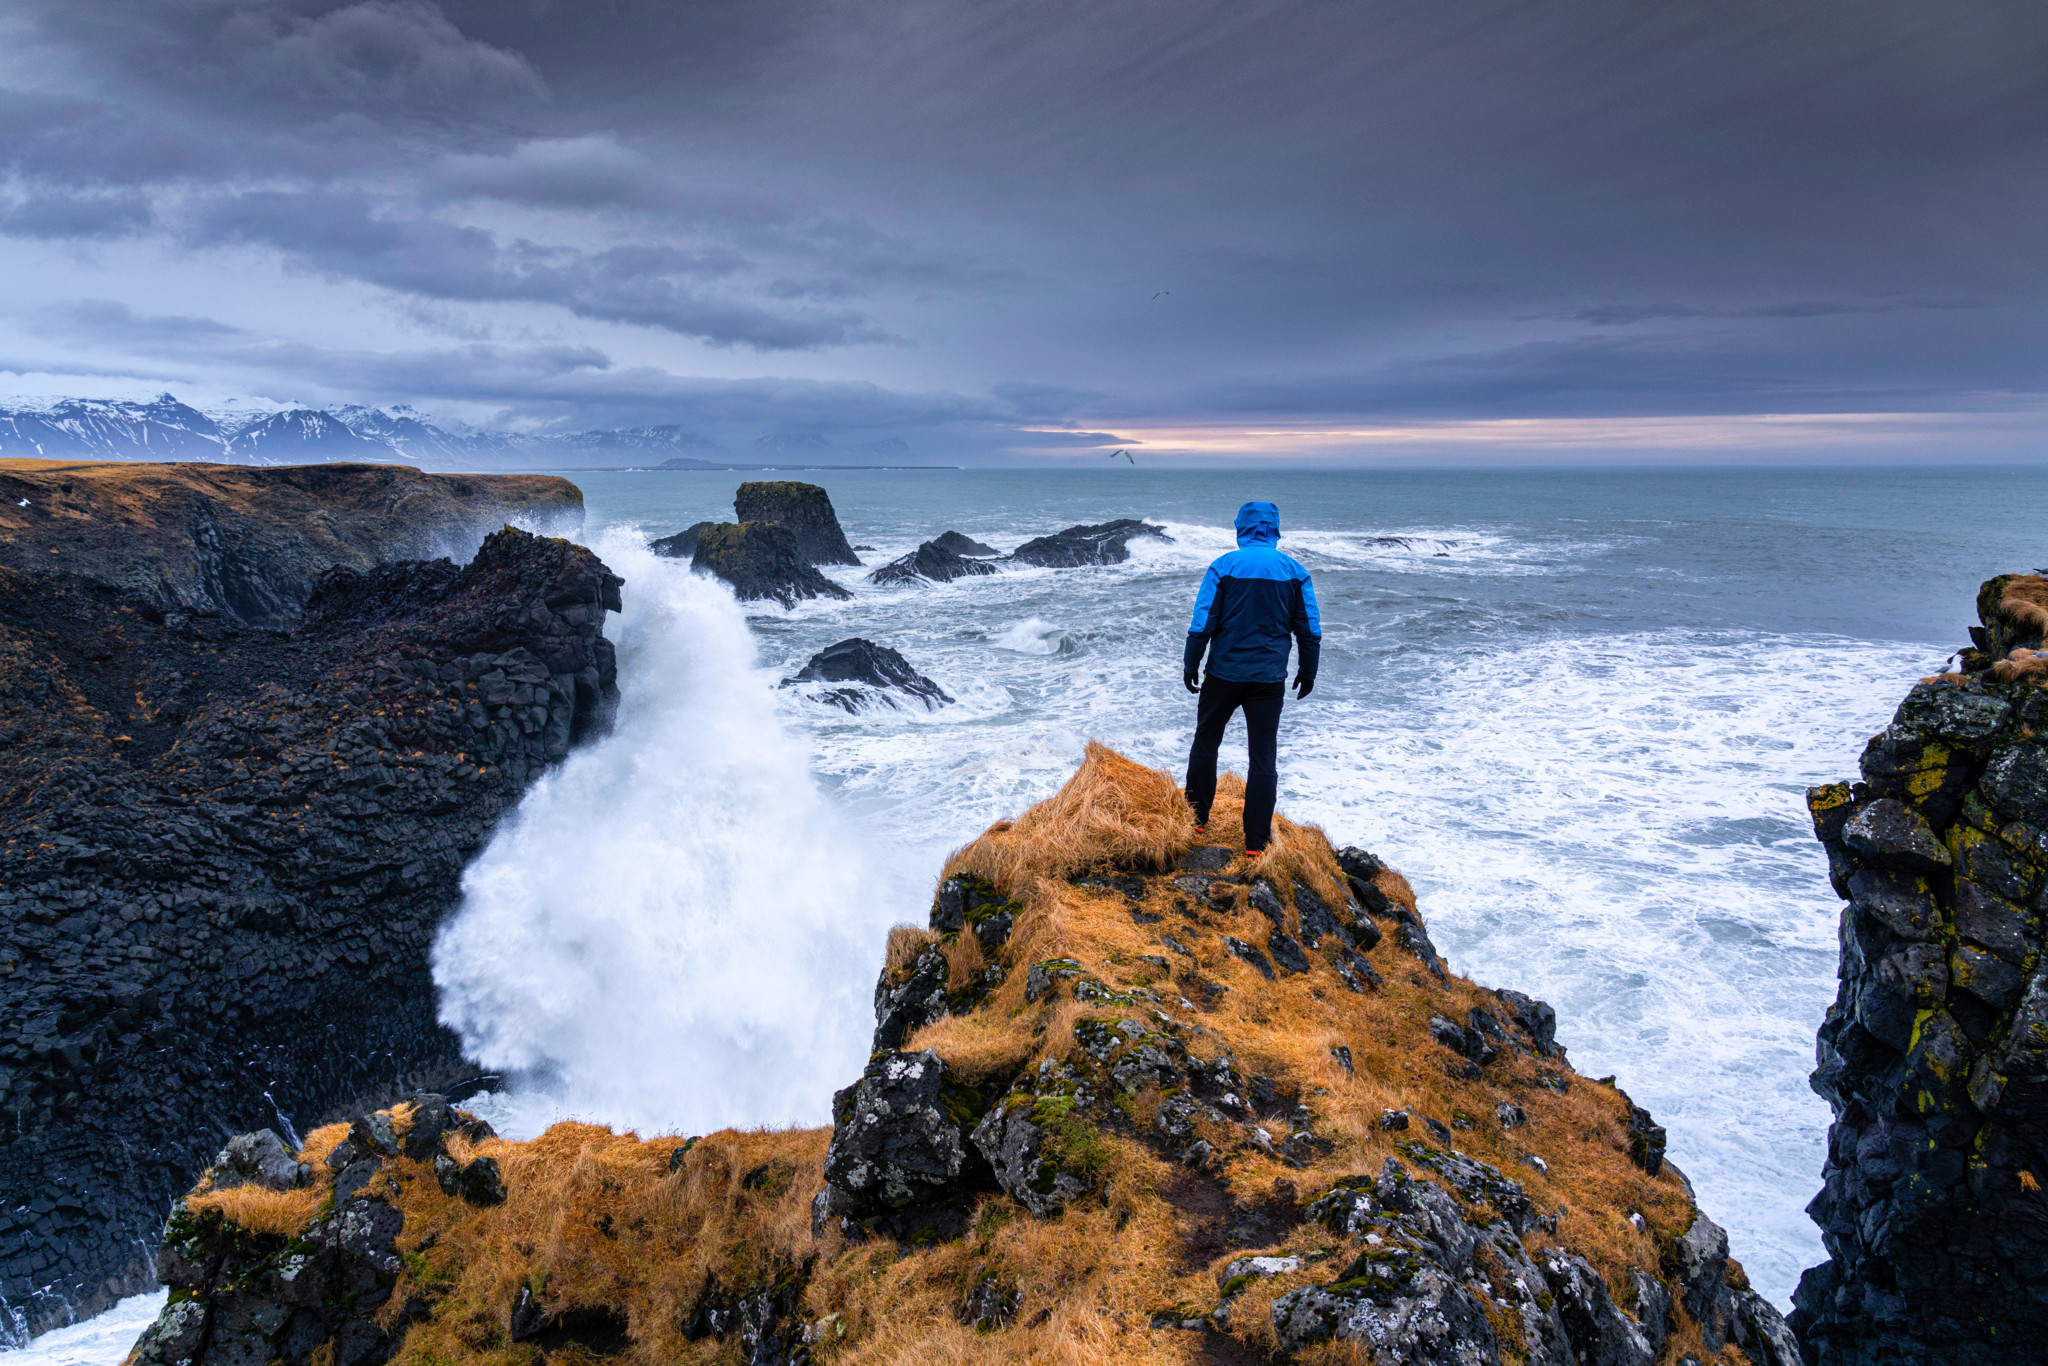 Iceland, Vesturland region, Snaefellsnes peninsula: rear view of a man gazing at the basaltic coastline with rough sea on a winter day.